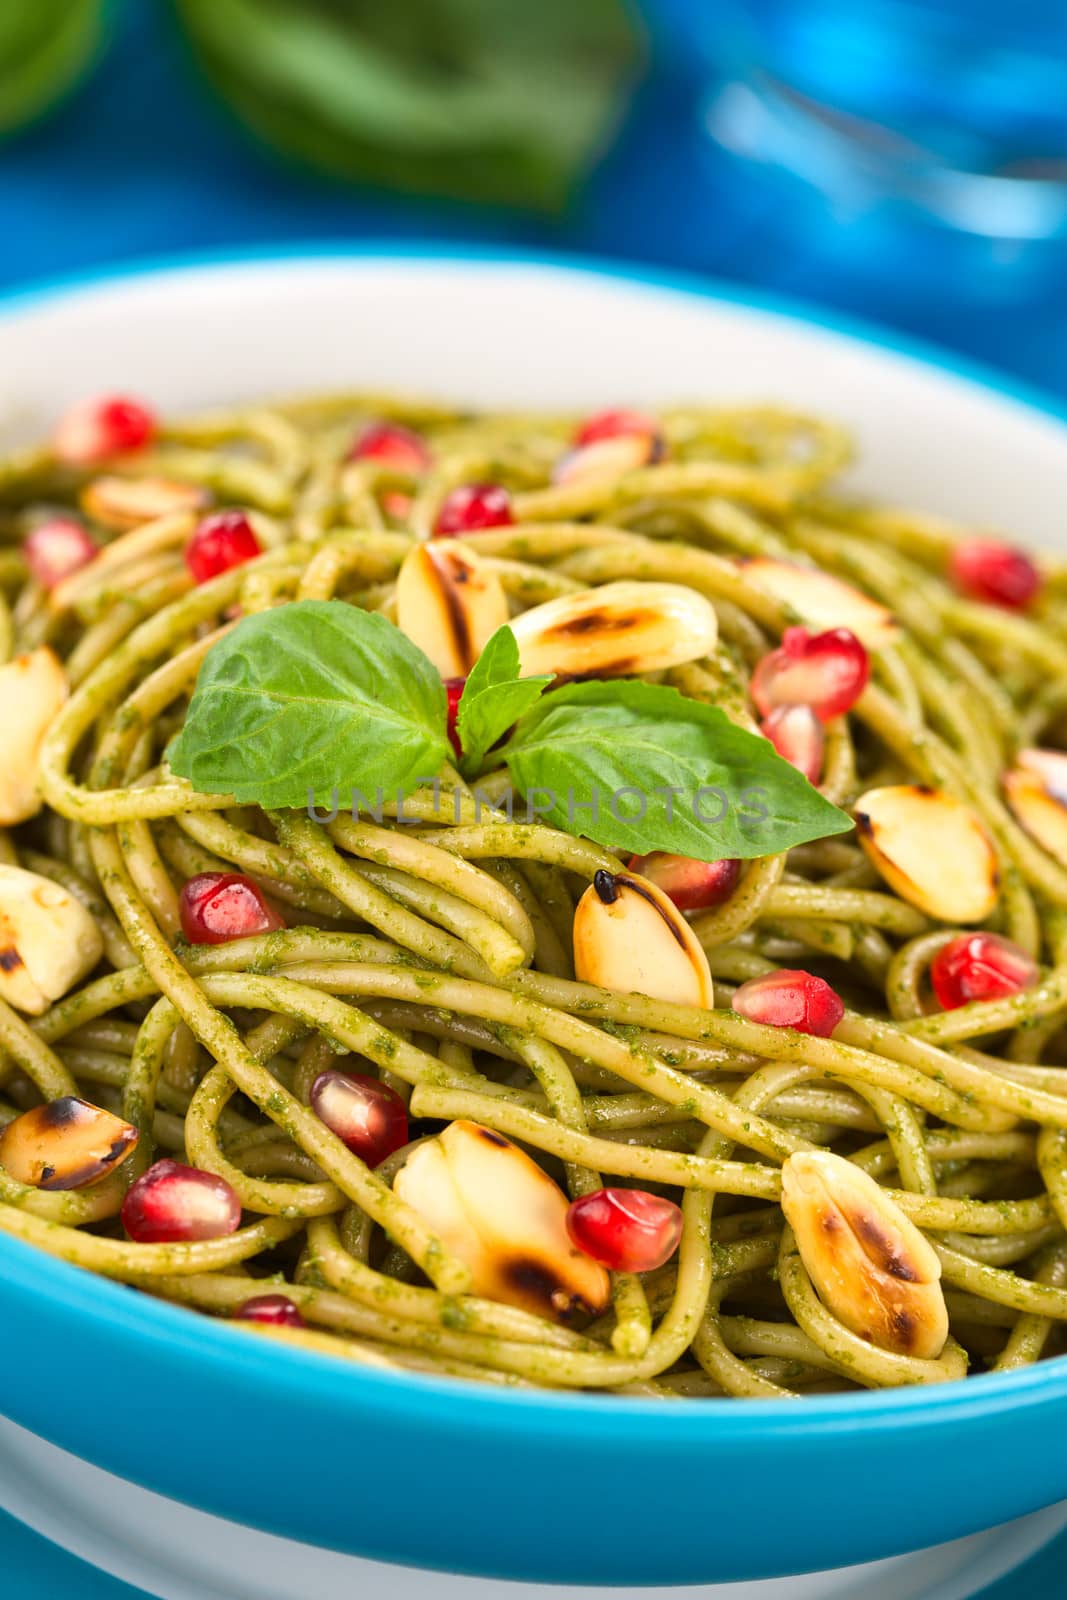 Spaghetti with pesto, pomegranate and roasted almond halves garnished with a basil leaf and served in a blue bowl on blue wood, with glass of water and basil leaf in the back (Selective Focus, Focus on the front of the basil leaf on the dish)